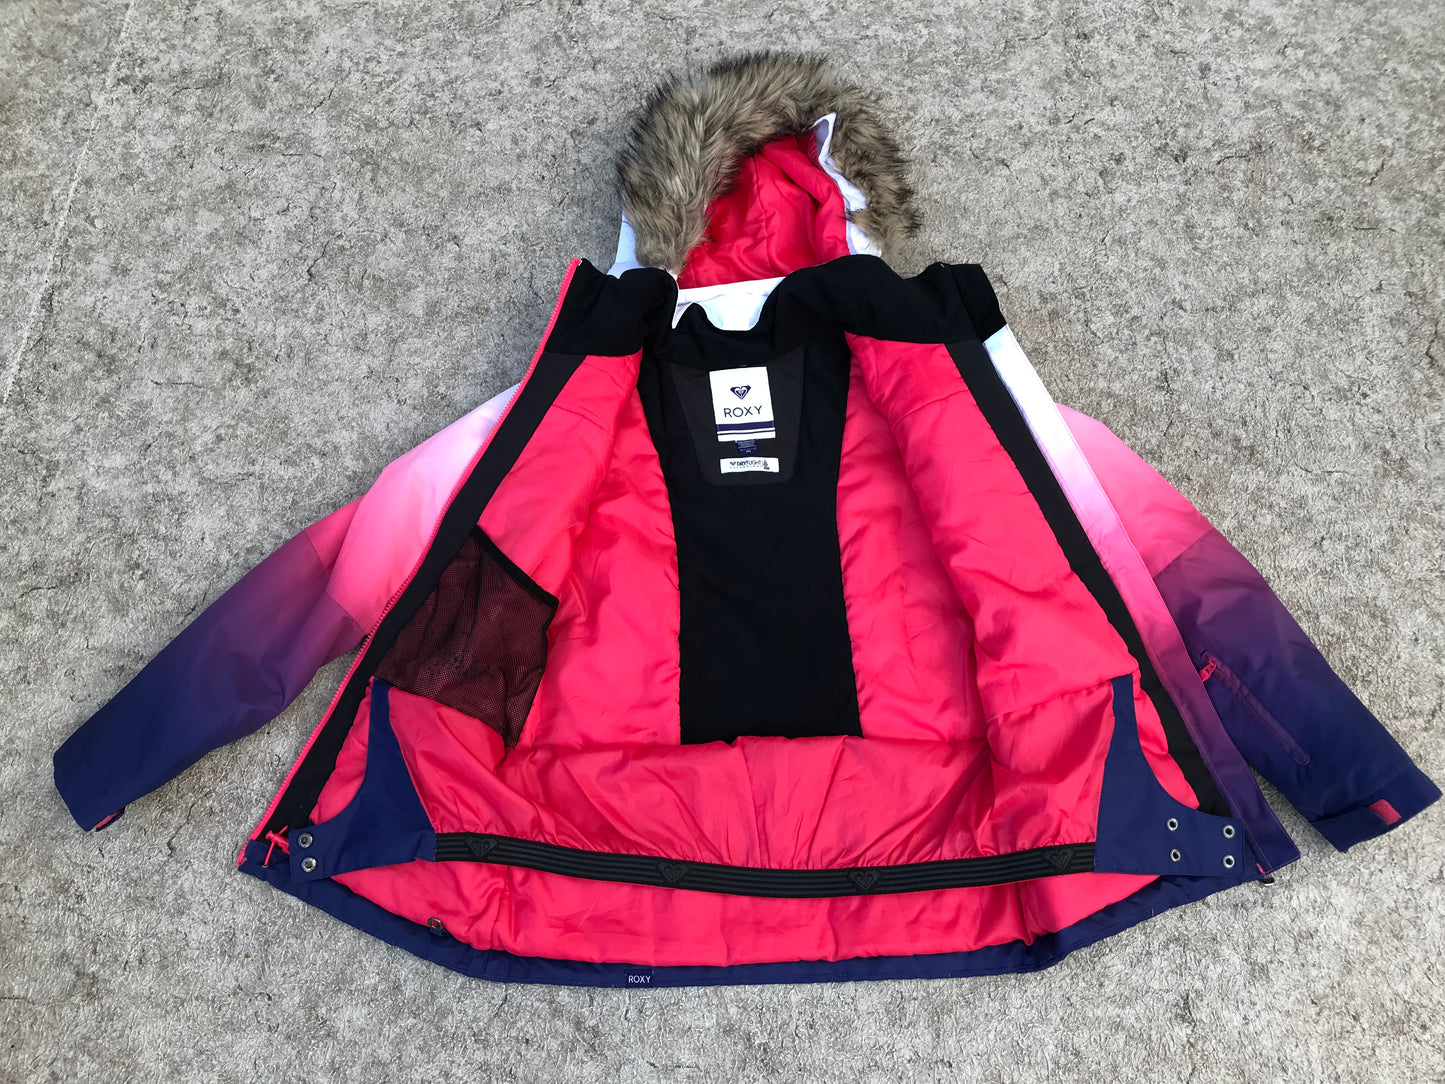 Winter Coat Child Size 16 Youth XX Large Roxy With Snow Belt Purple Fushia With Faux Fur New Demo Model